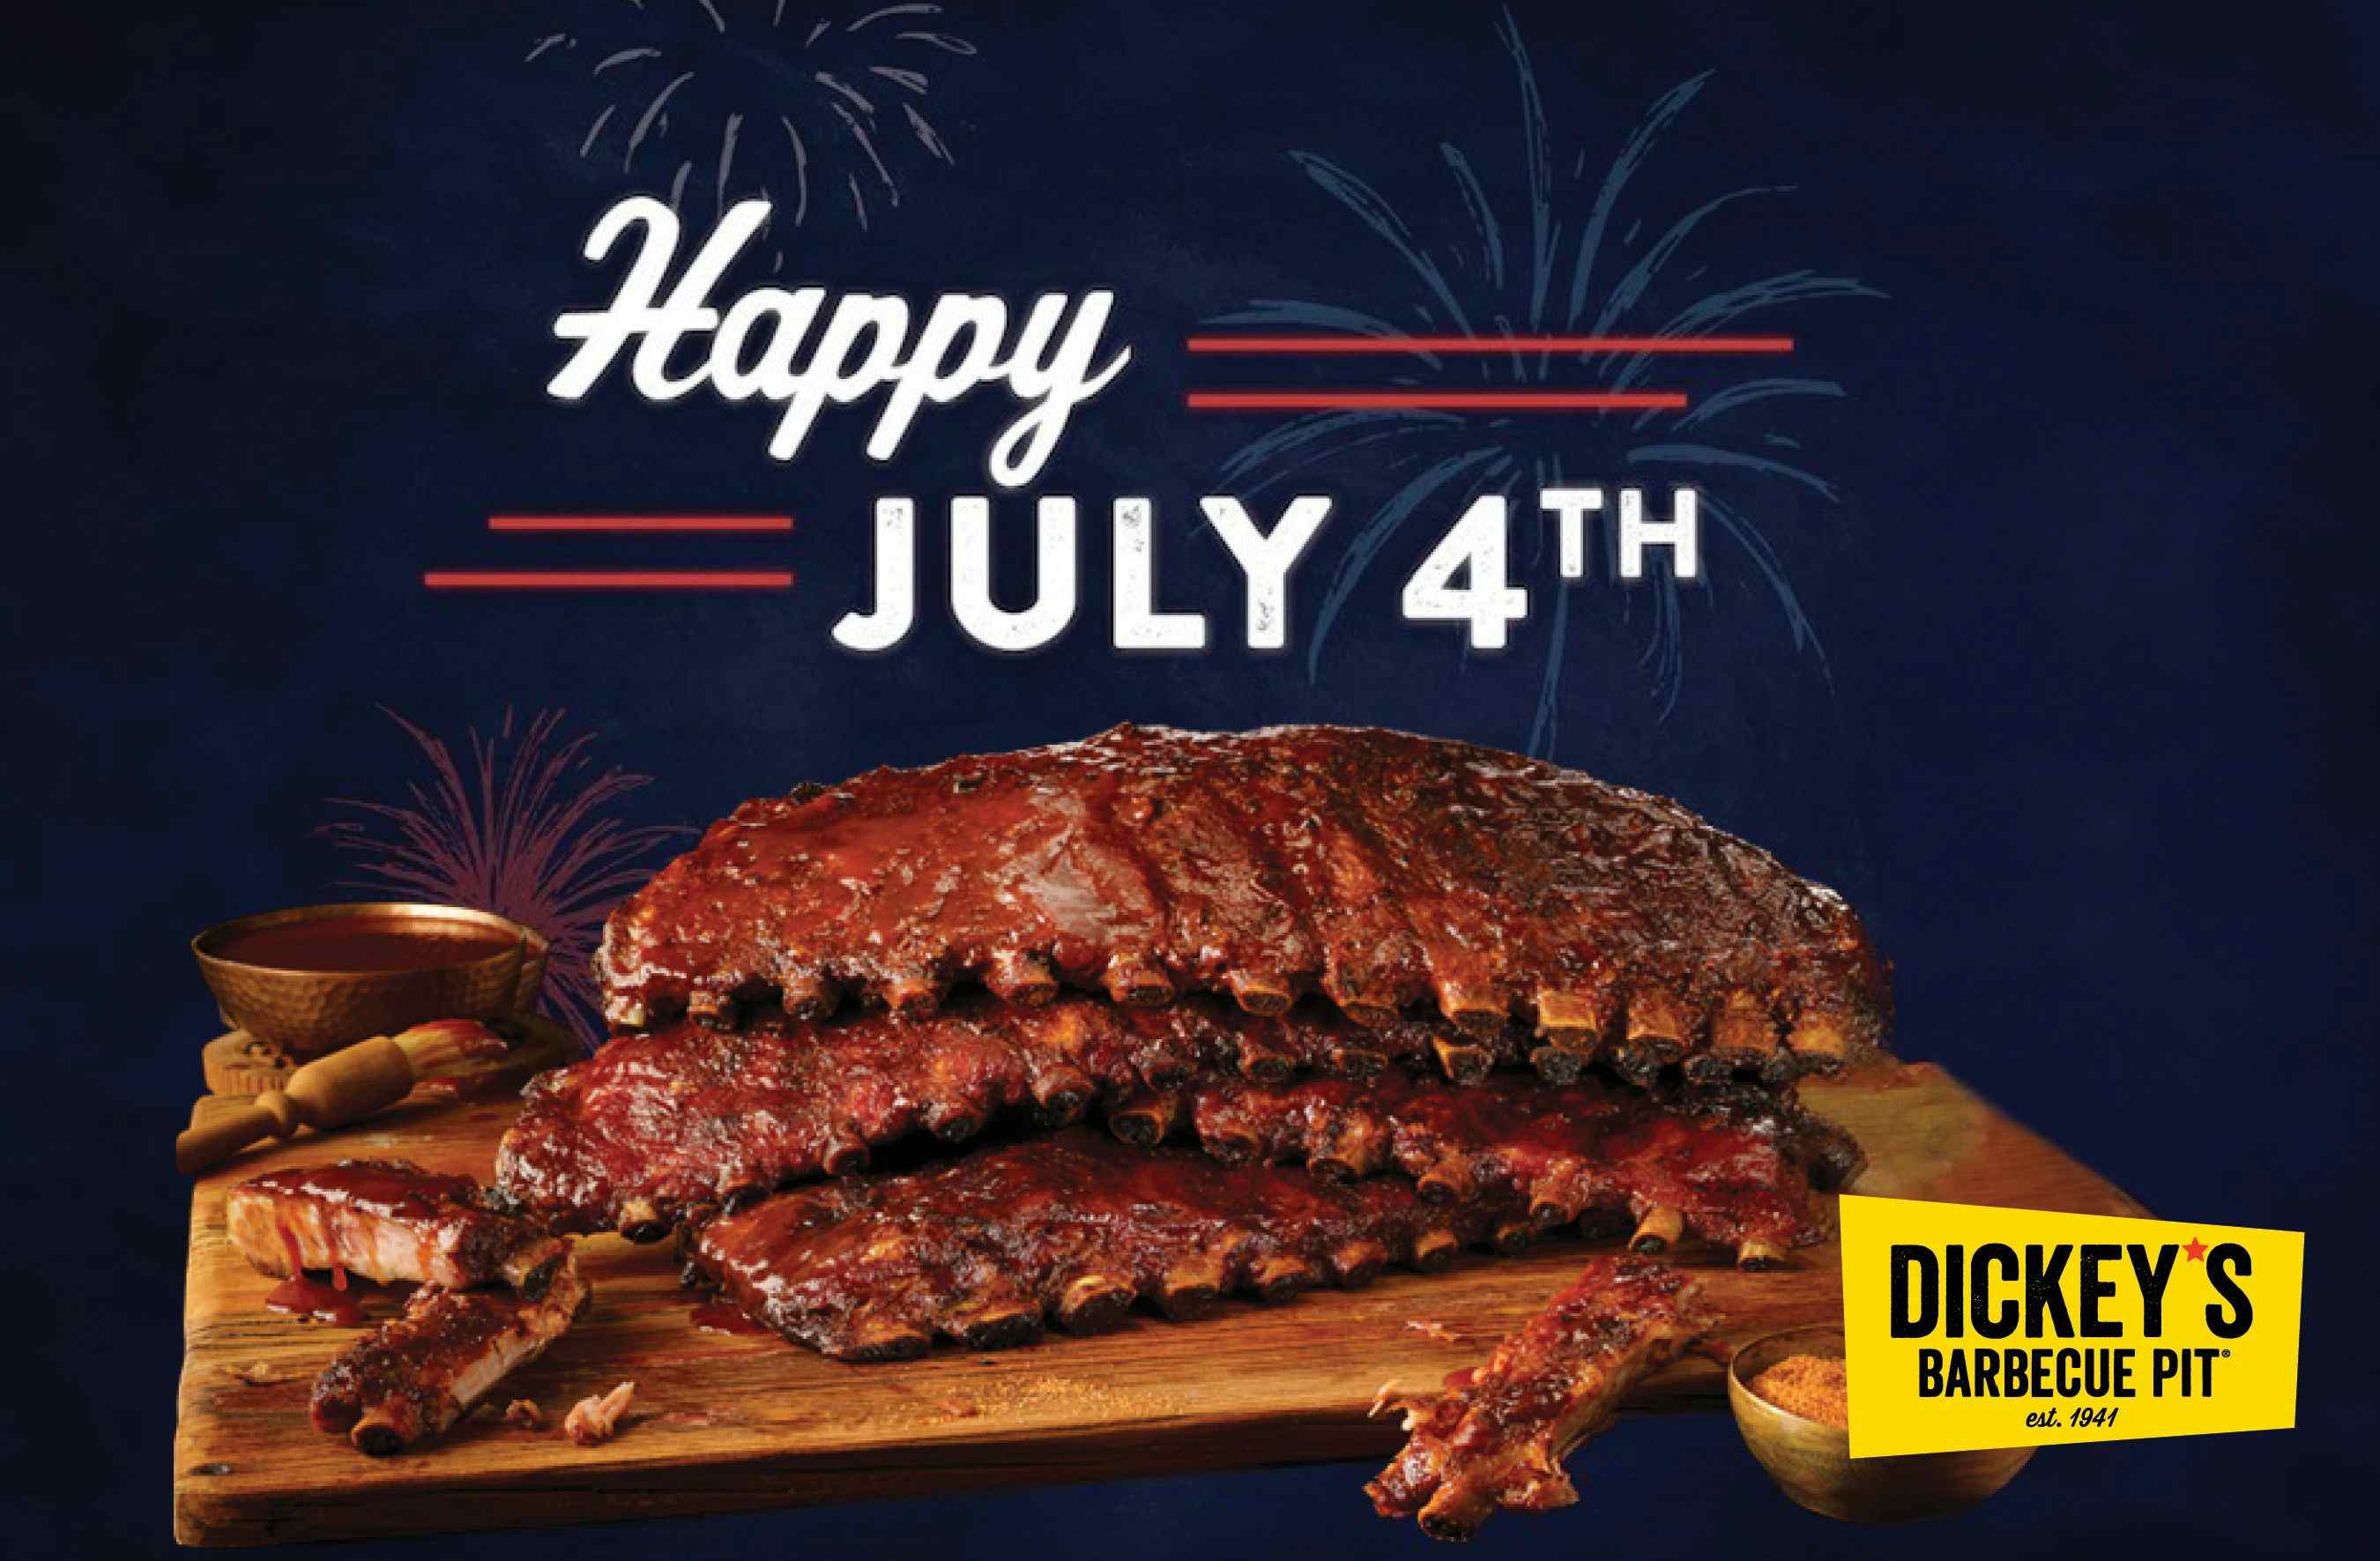 Red, White and ‘Cue: Celebrate July 4th with Dickey’s Barbecue